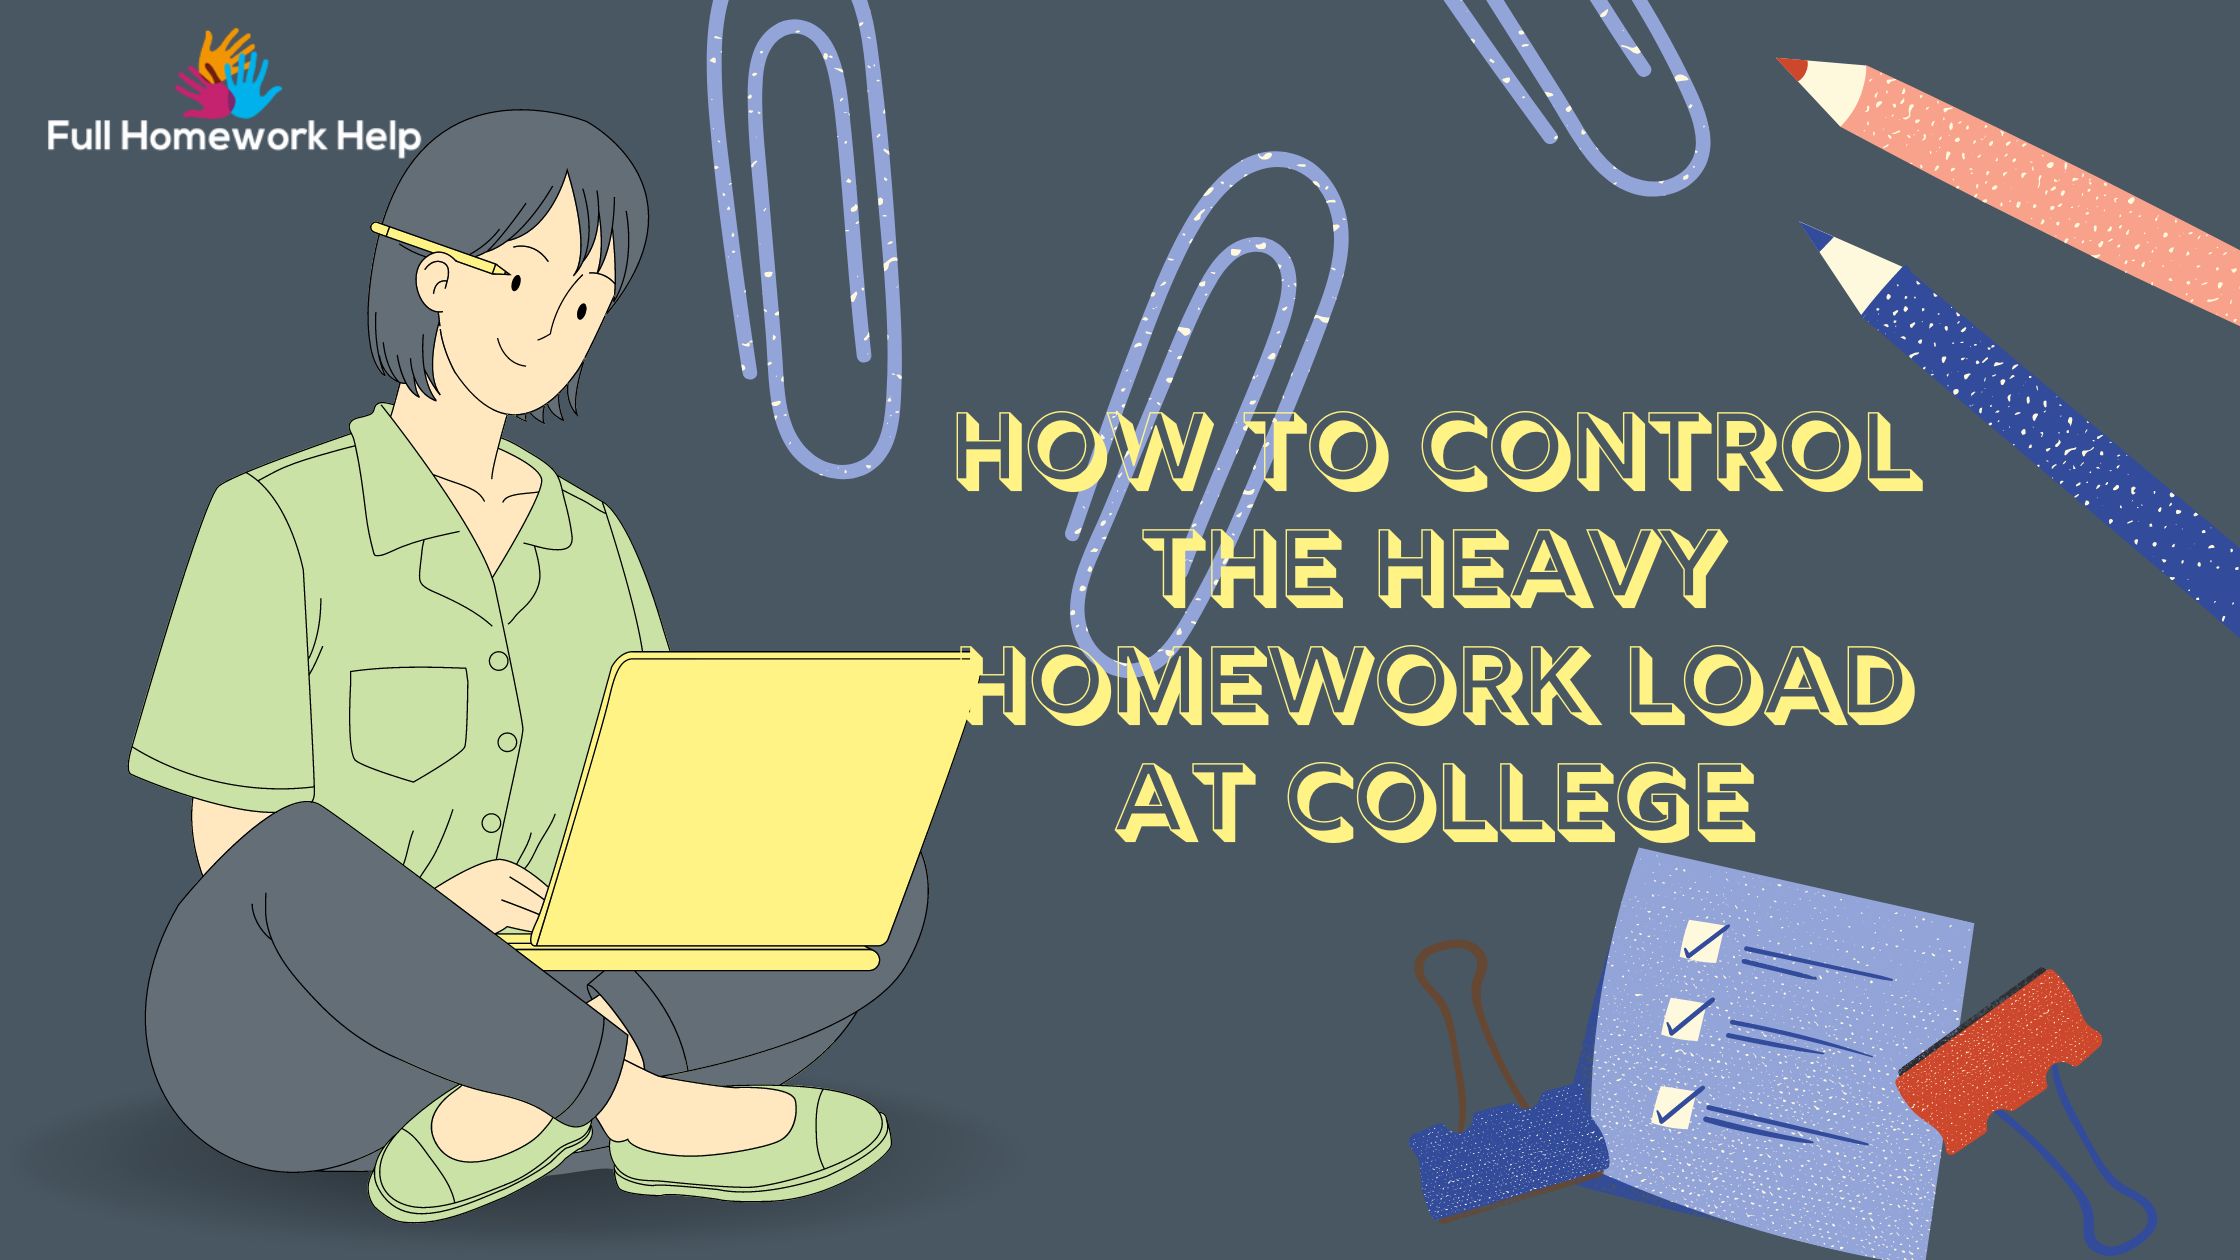 How to Control the Heavy Homework load at College